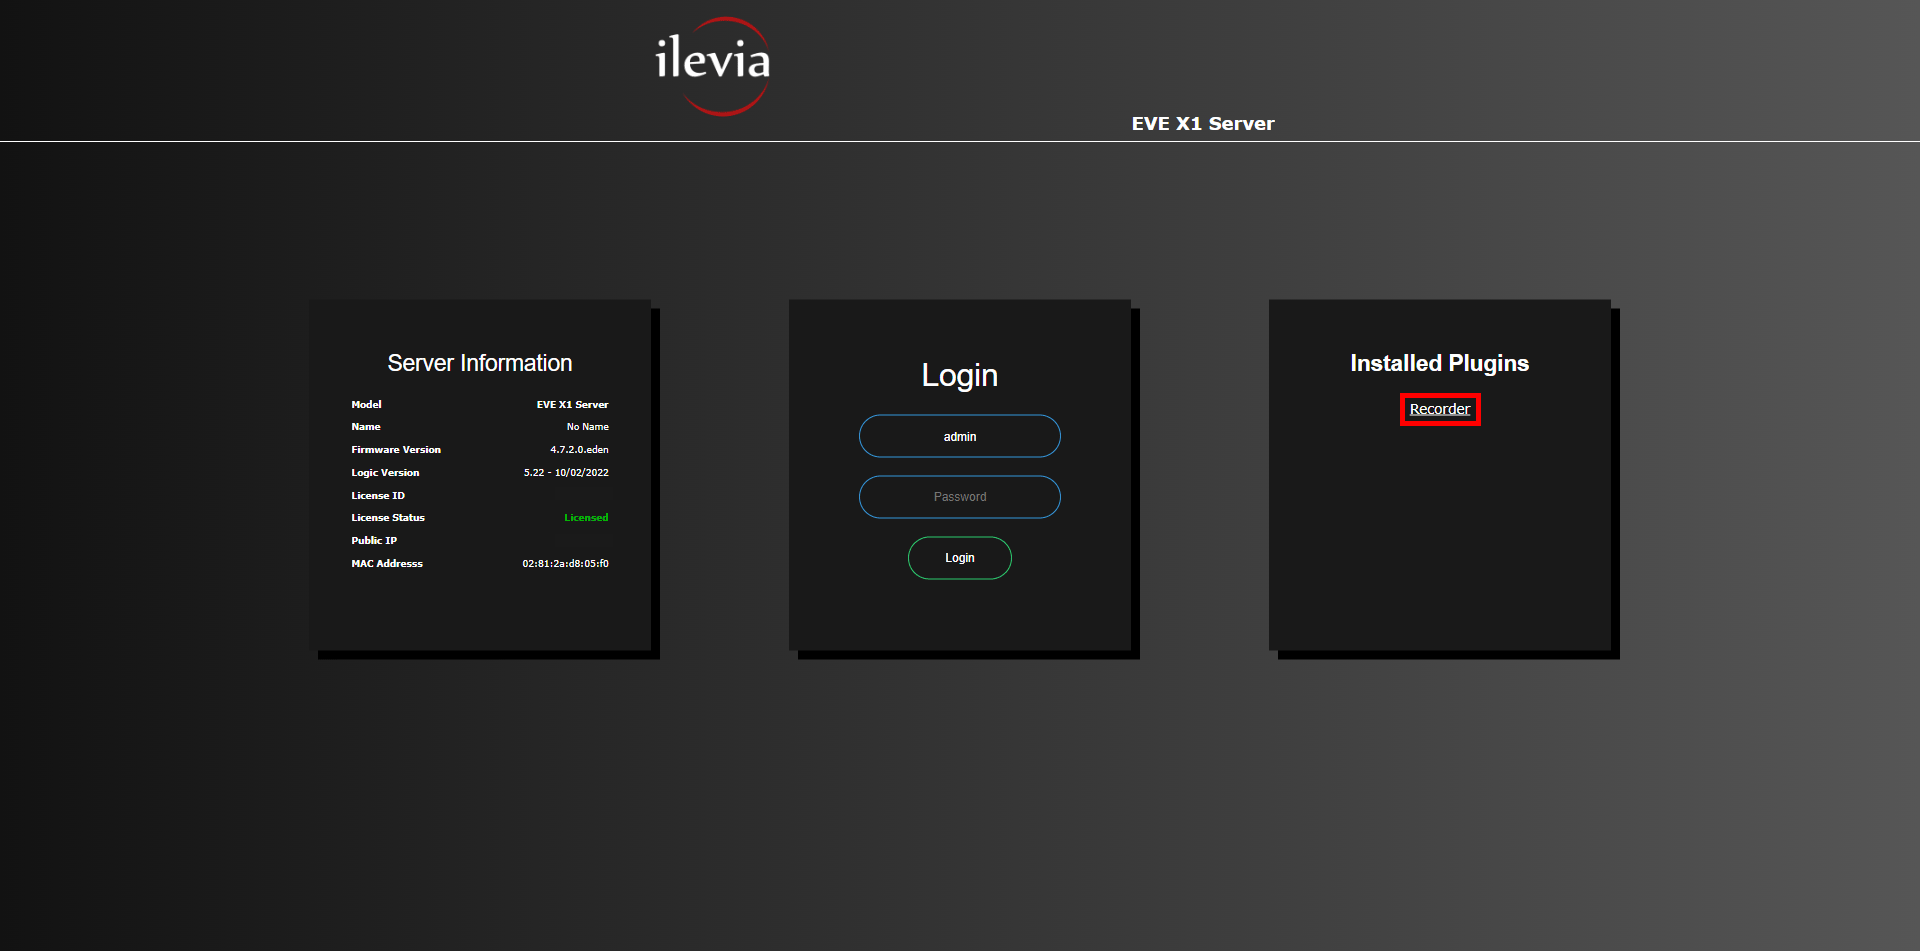 How to access the recorder web page of the Ilevia Home automation server 